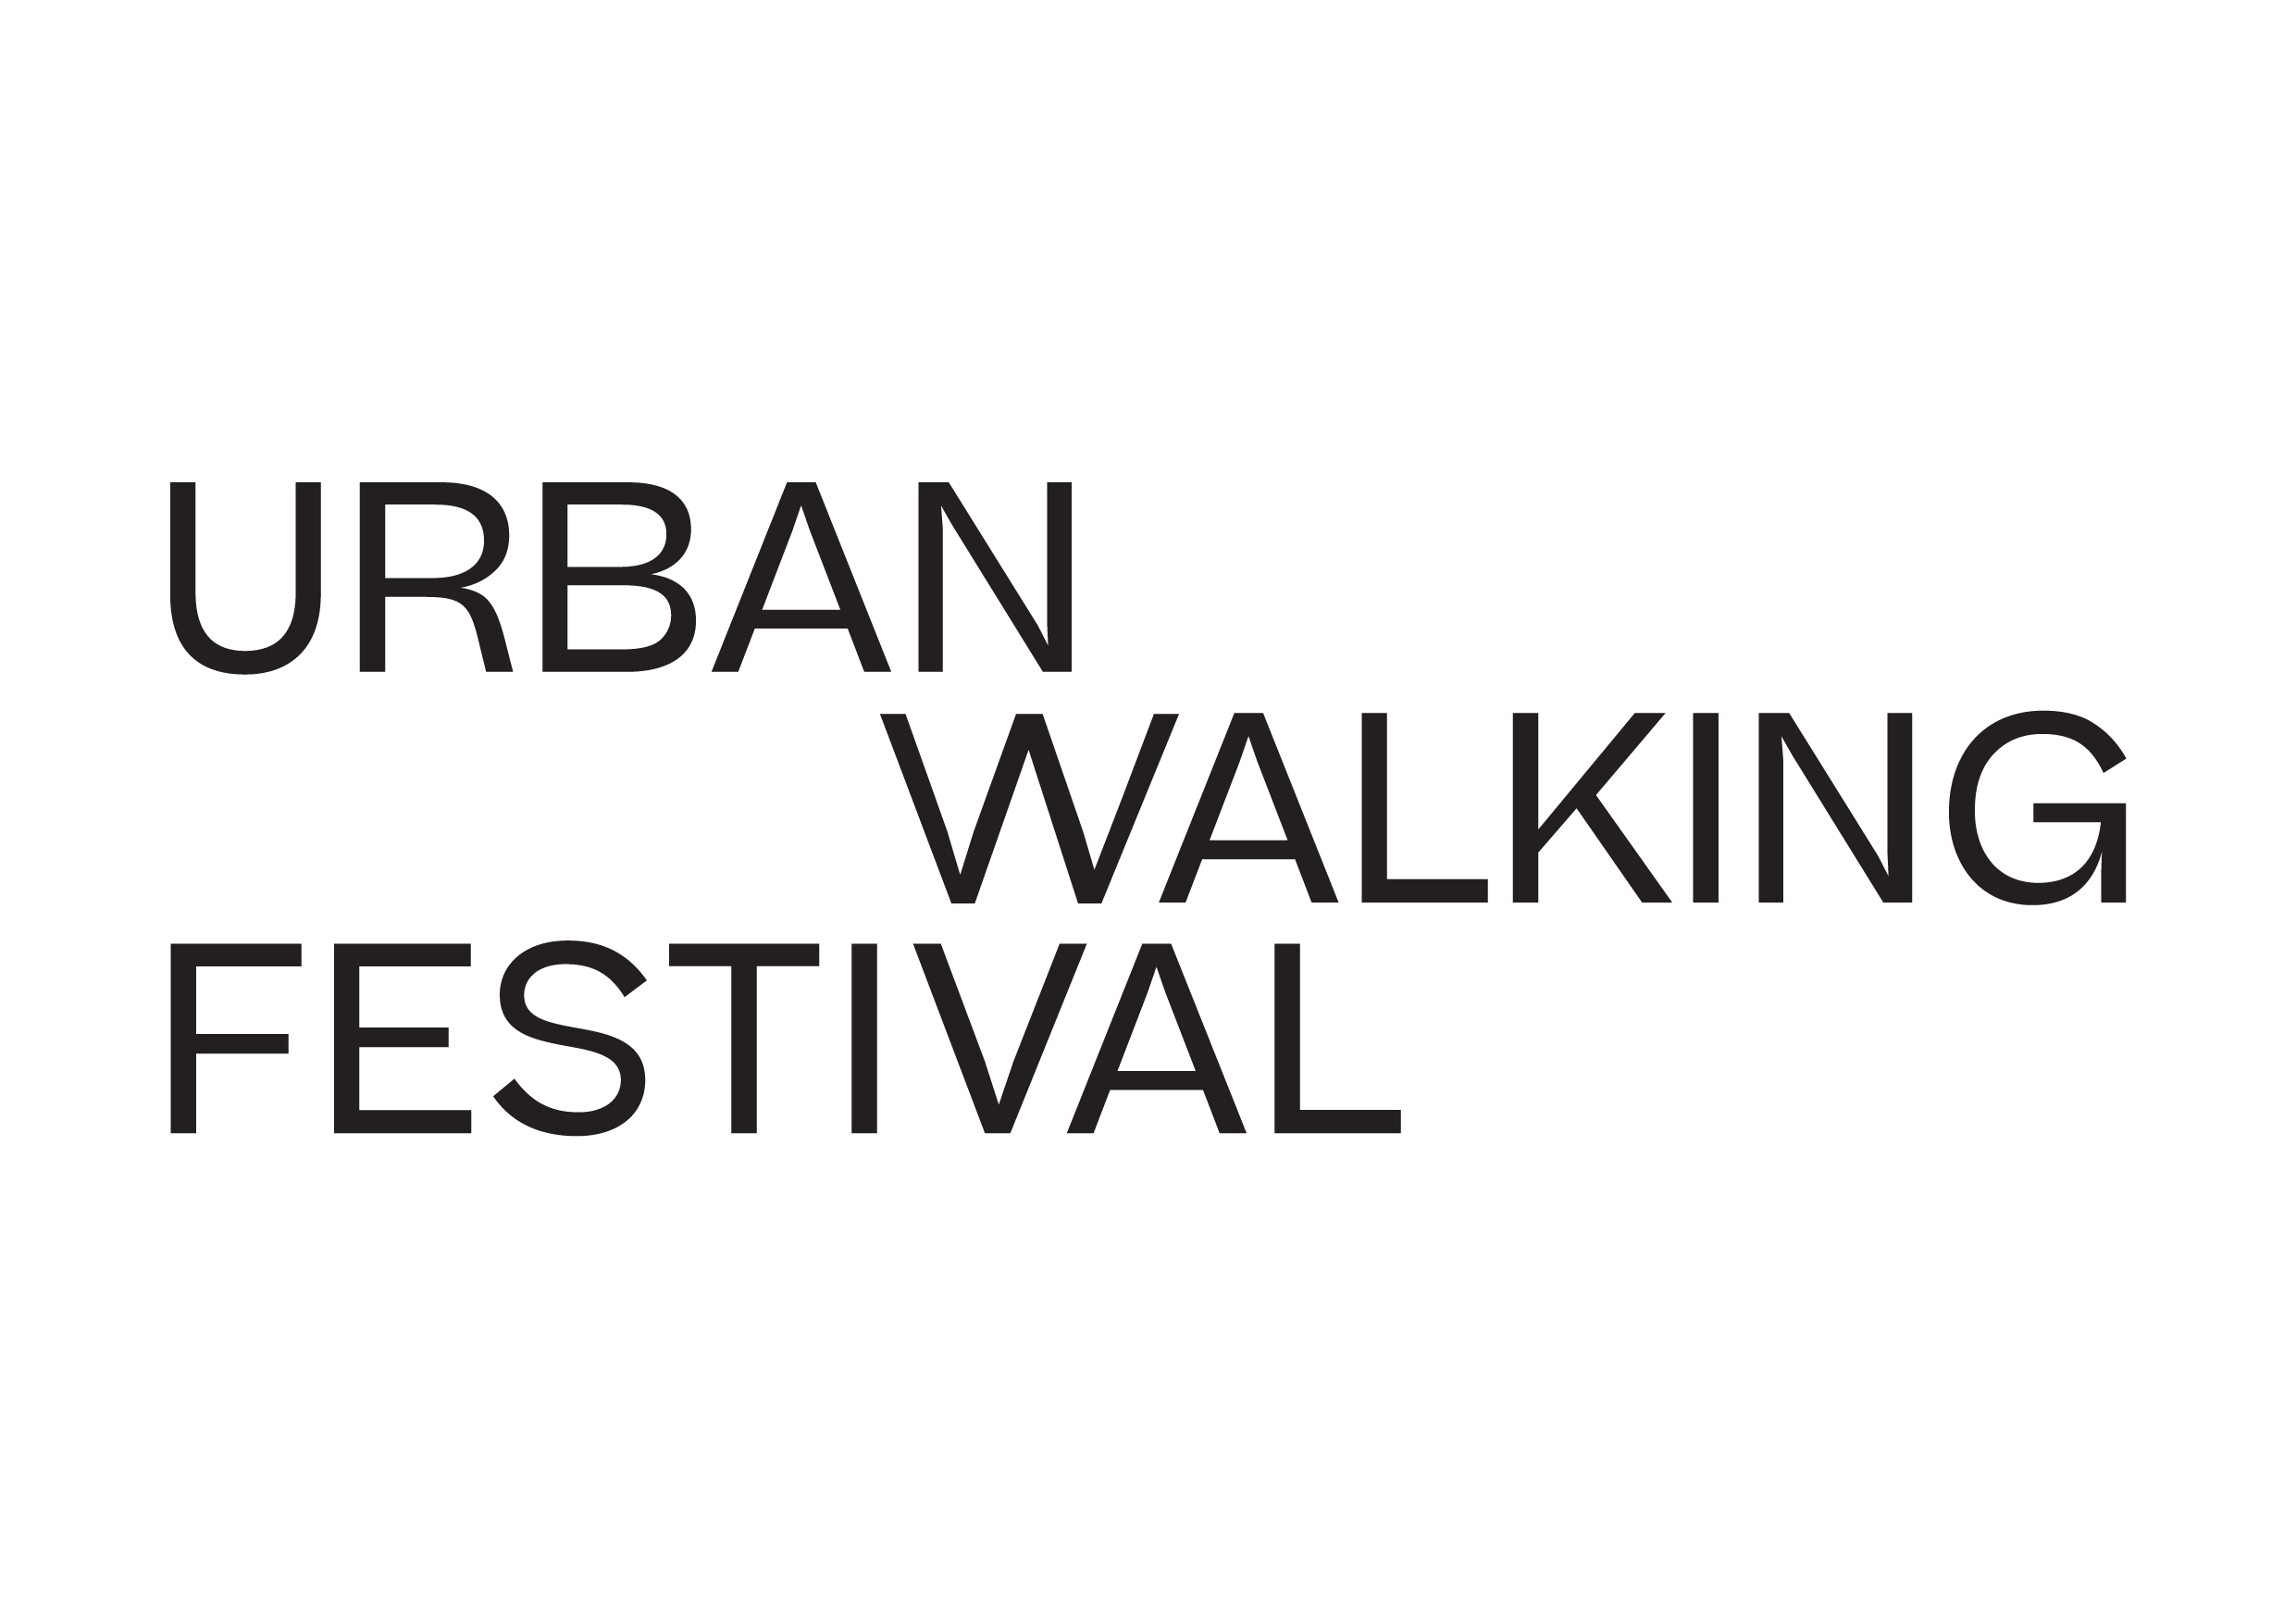 Walk planning resources for the Urban Walking Festival